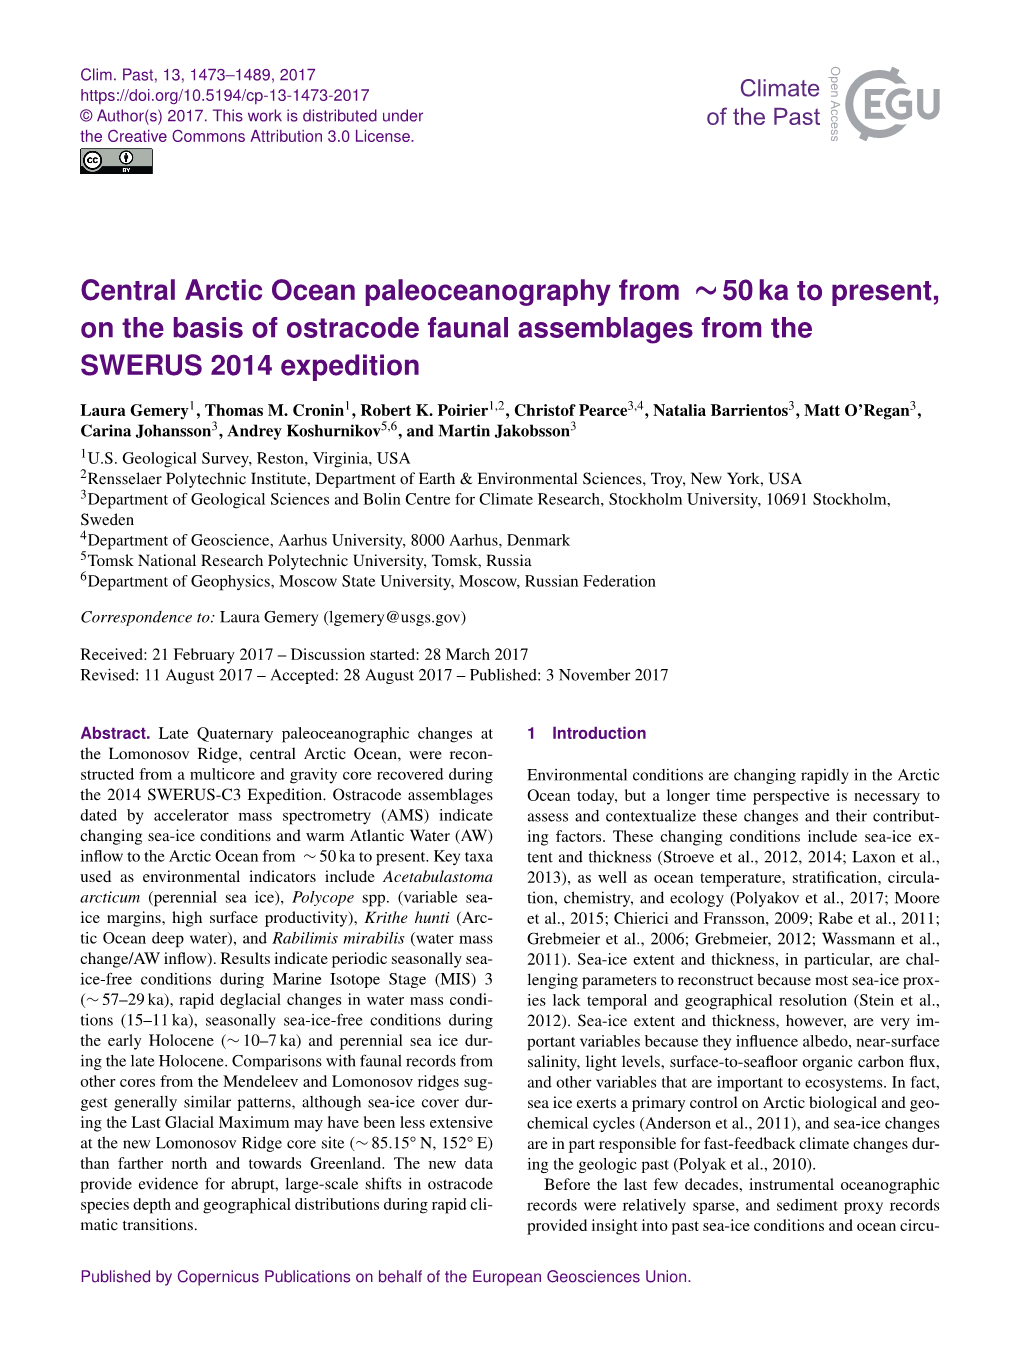 Central Arctic Ocean Paleoceanography from ∼50 Ka to Present, on the Basis of Ostracode Faunal Assemblages from the SWERUS